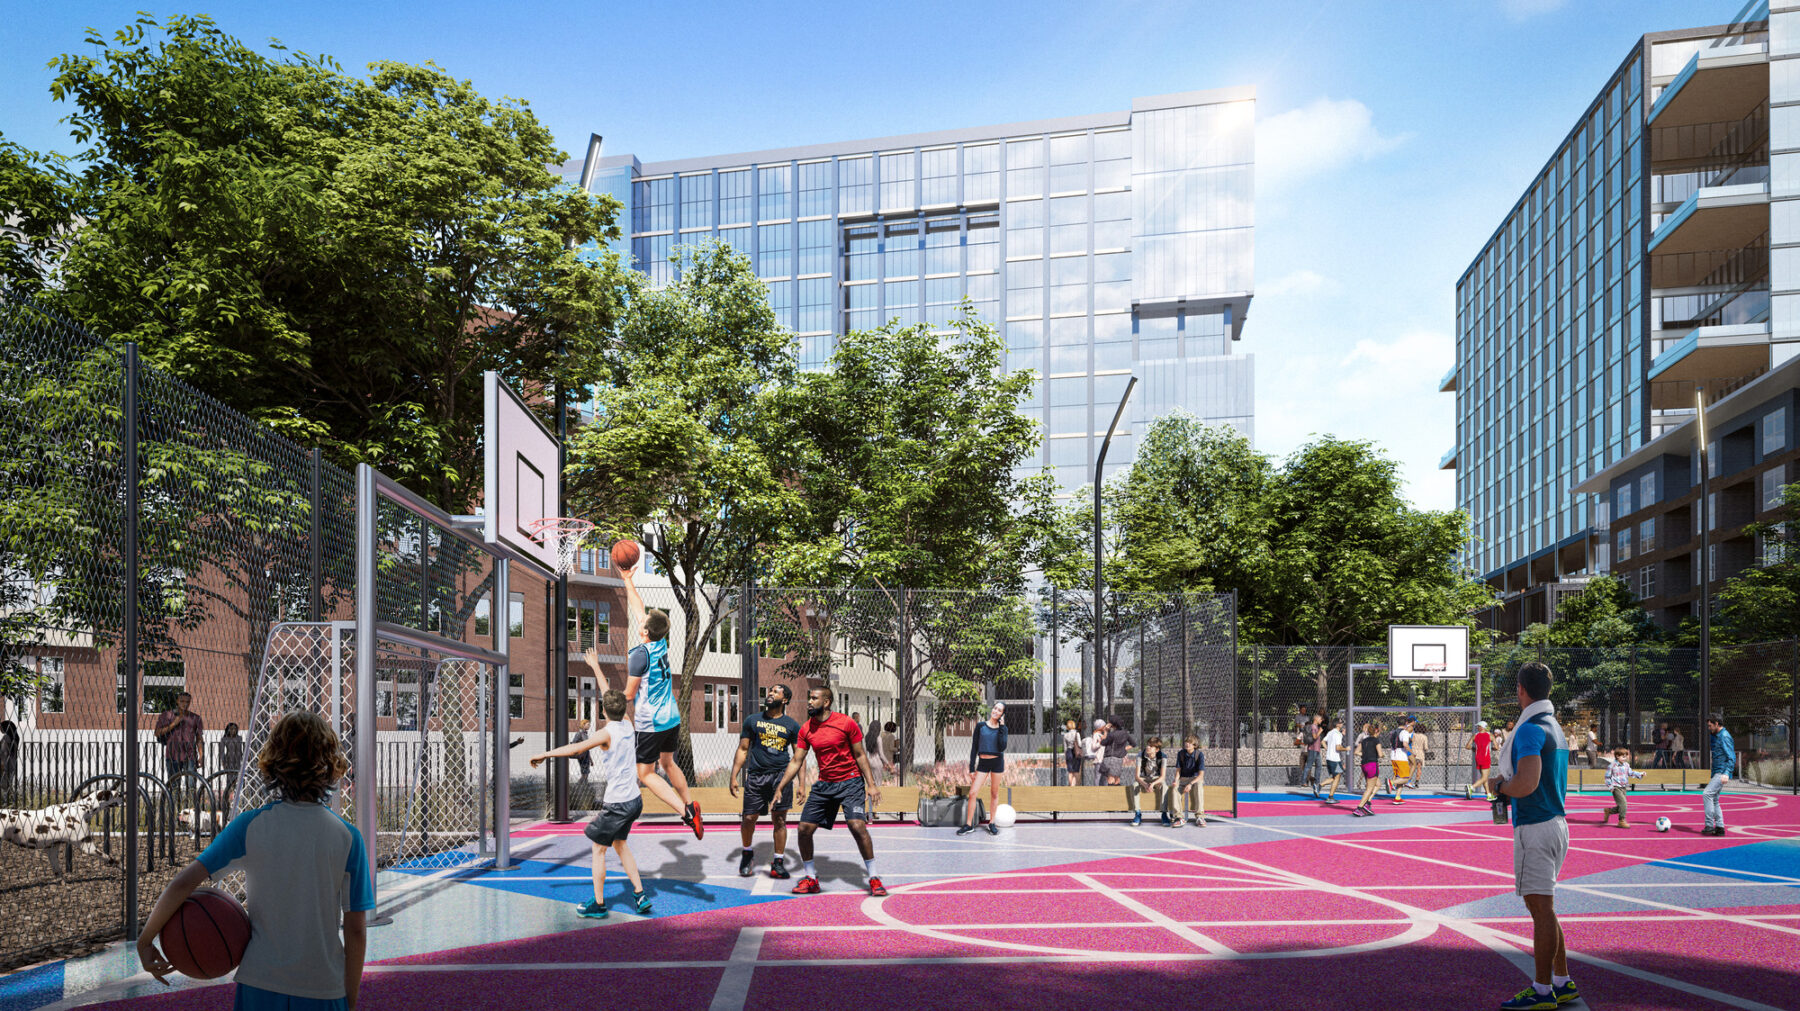 Rendering depicting players on a basketball court situated within a new urban development with high rise buildings